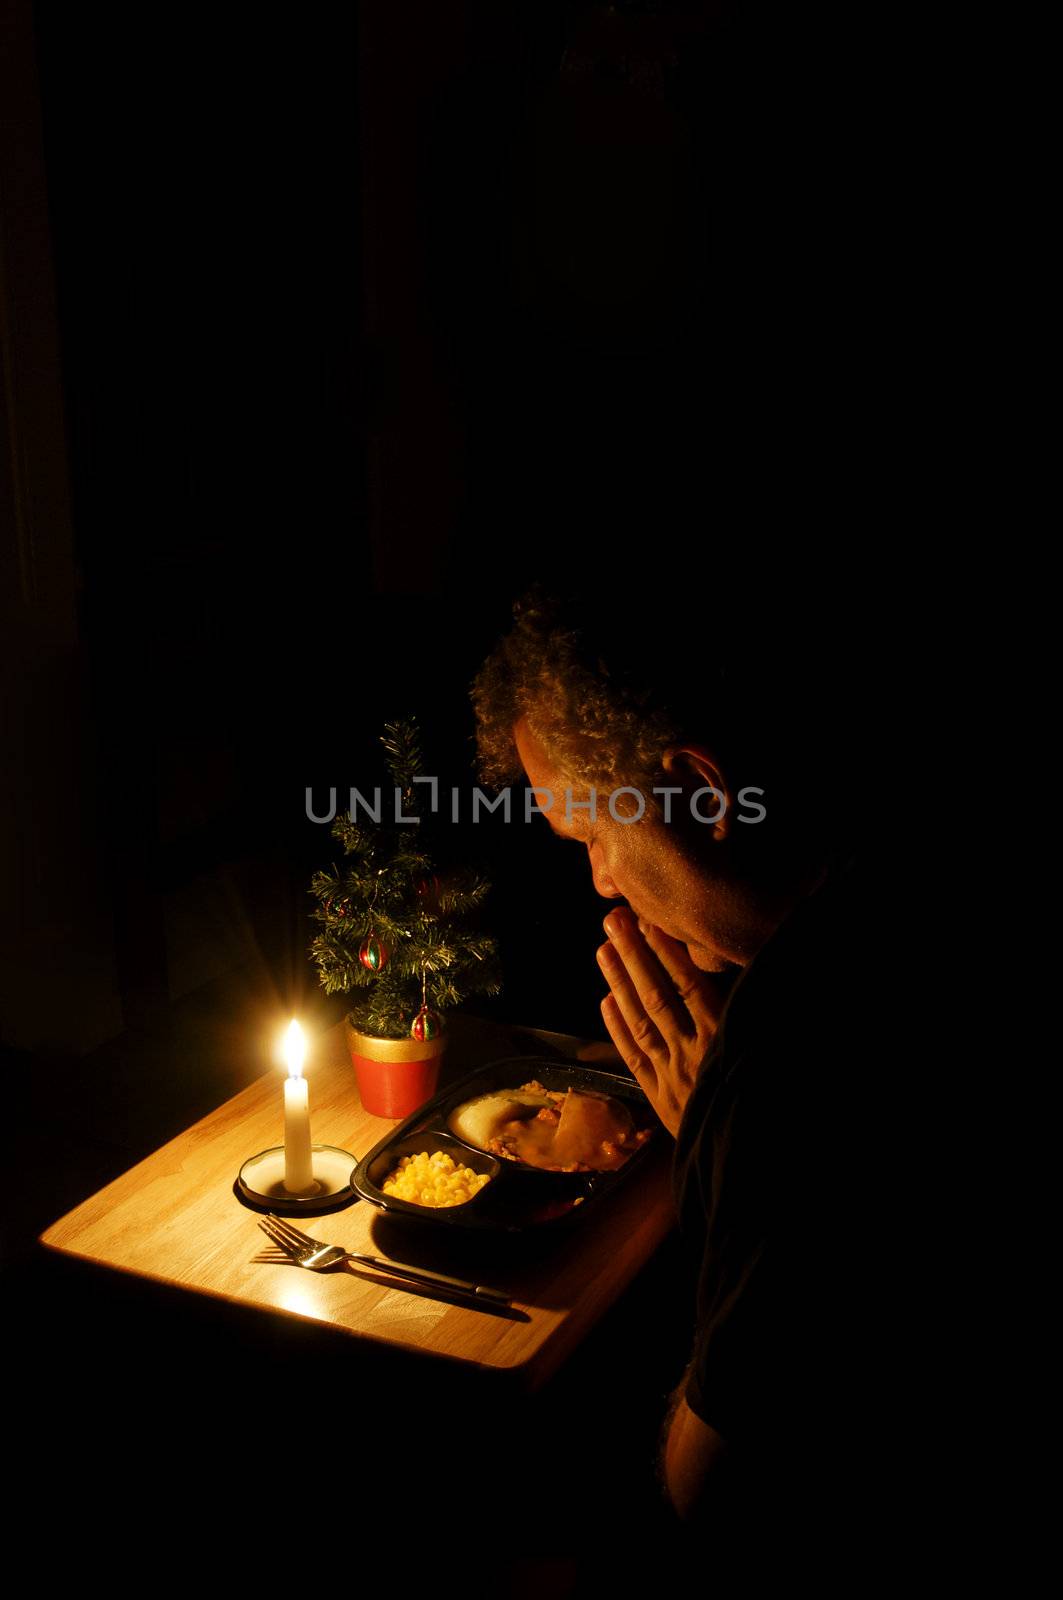 A middle-aged man praying over a TV dinner at Christmas time.